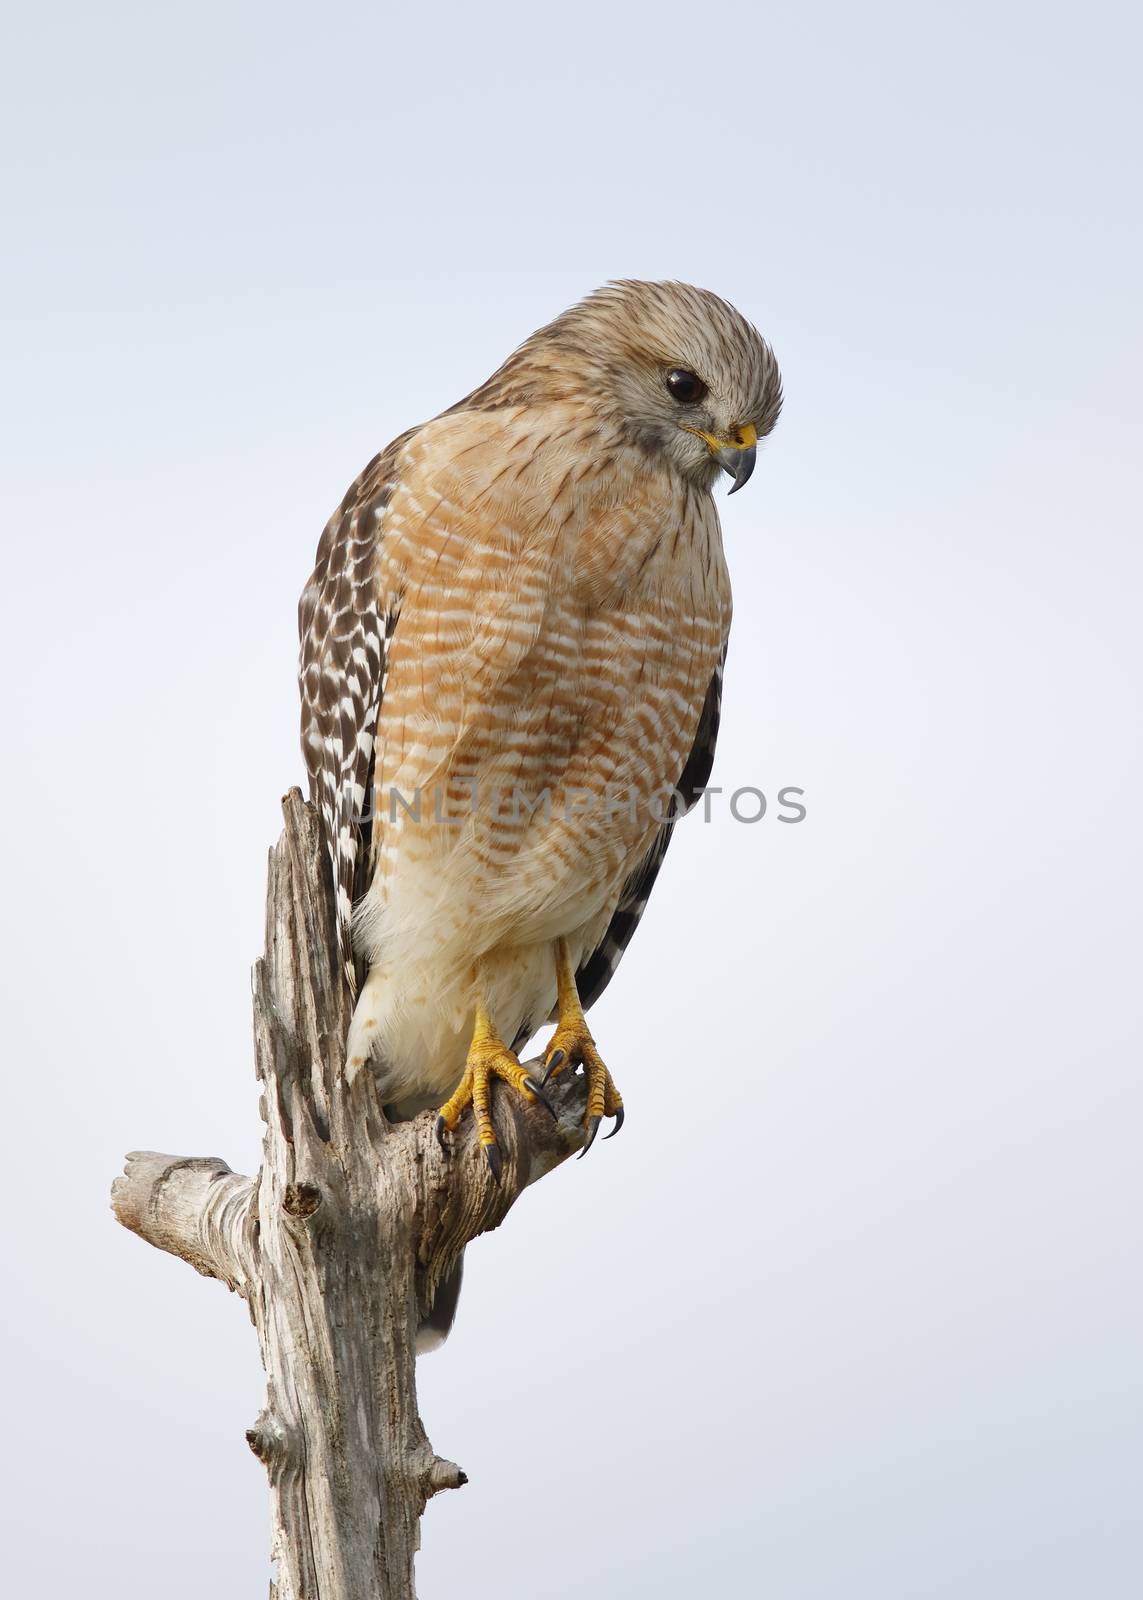 Red-shouldered Hawk perched in a dead tree - Florida by gonepaddling